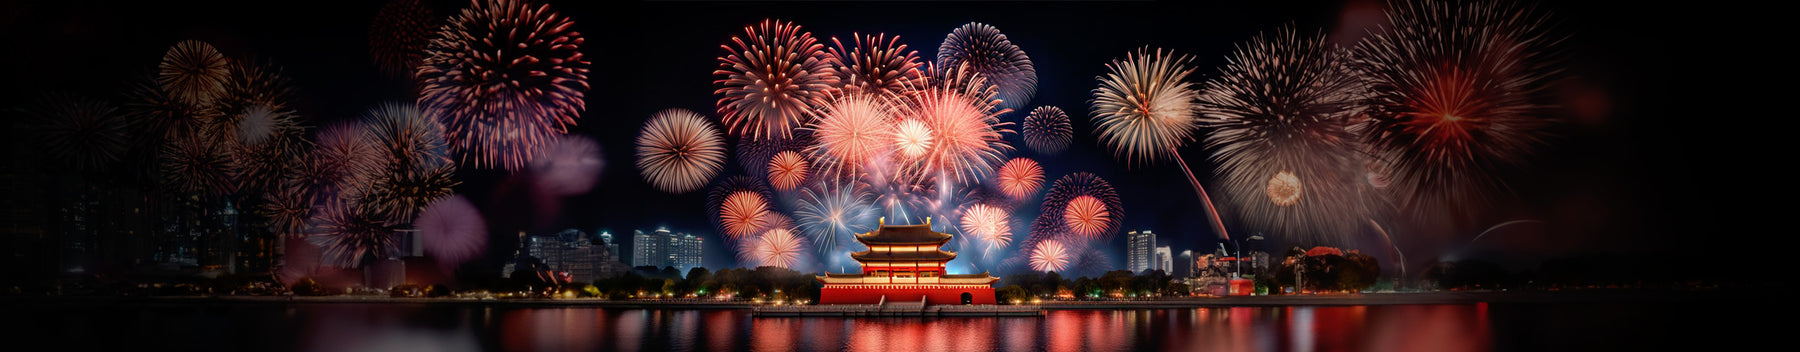 Chinese New Year Fireworks Etiquette: The Do's and Don'ts